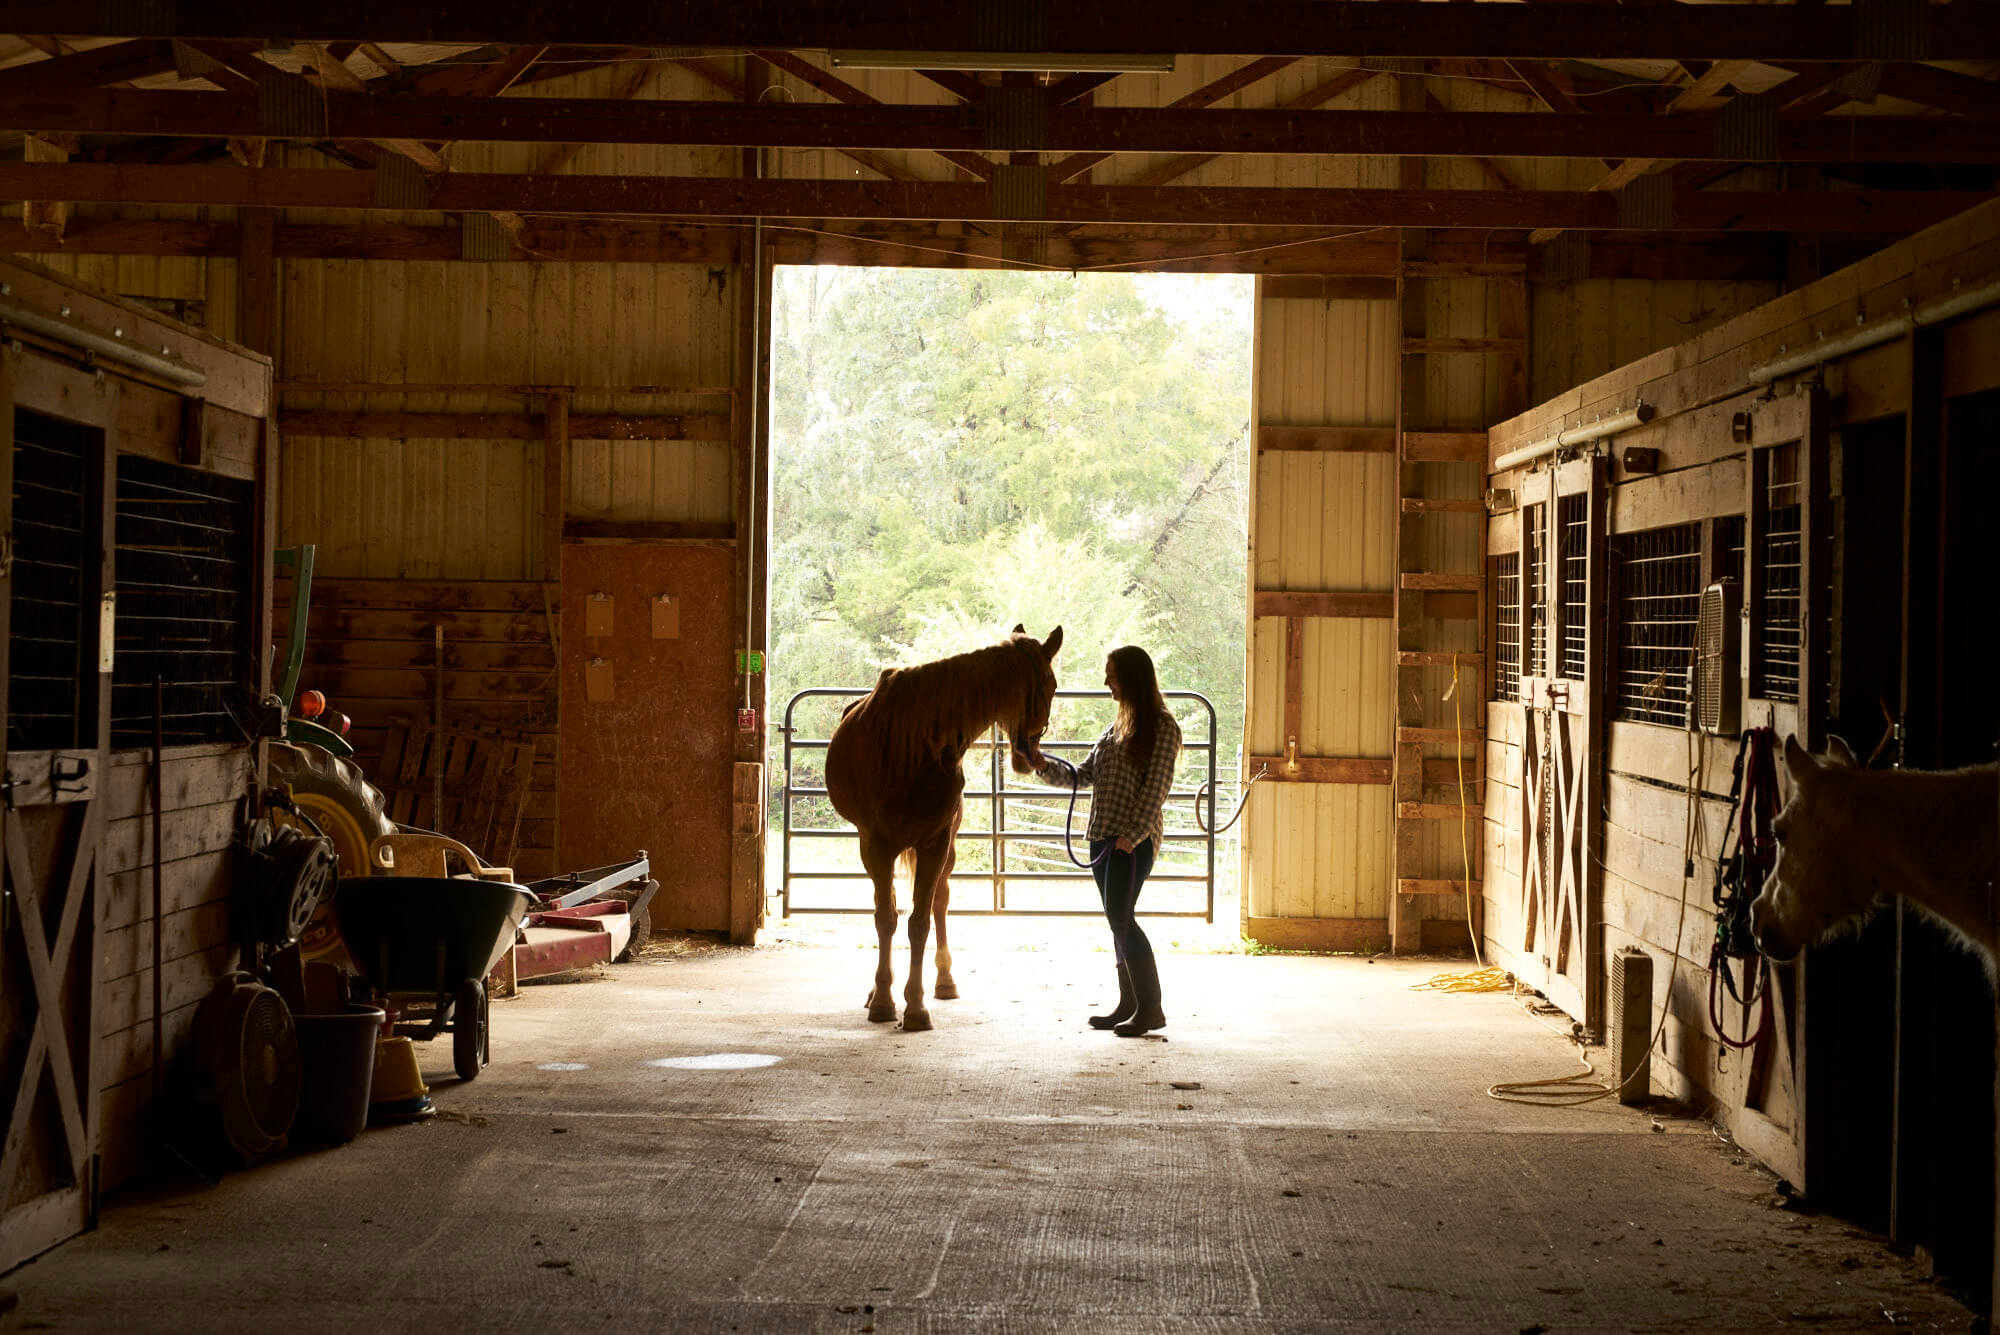 A woman leads a horse through the Horse Haven barn.